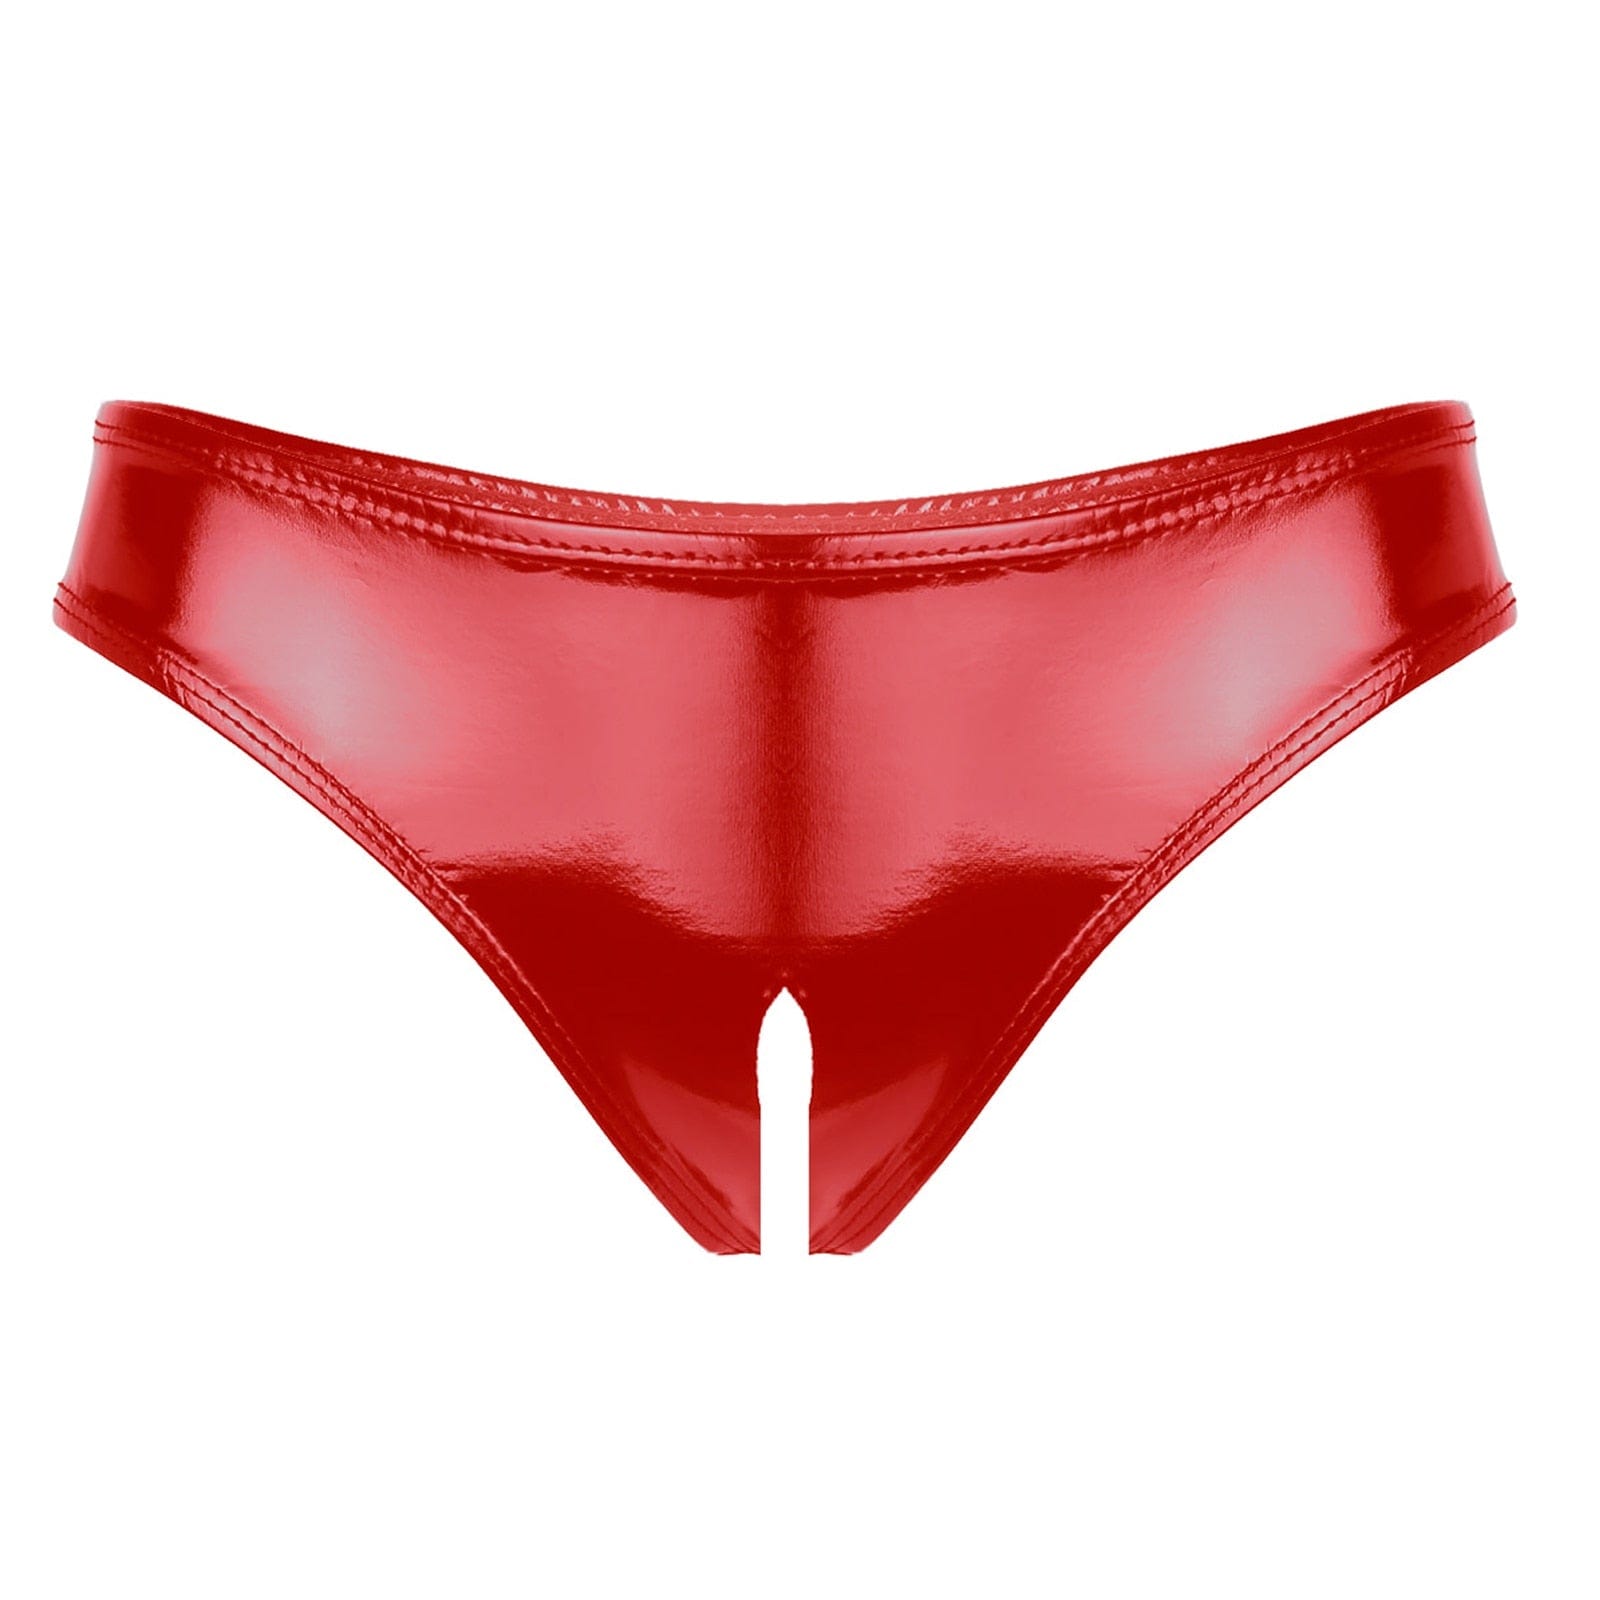 Kinky Cloth Red C / S Glossy Open Crotch Lingerie Set